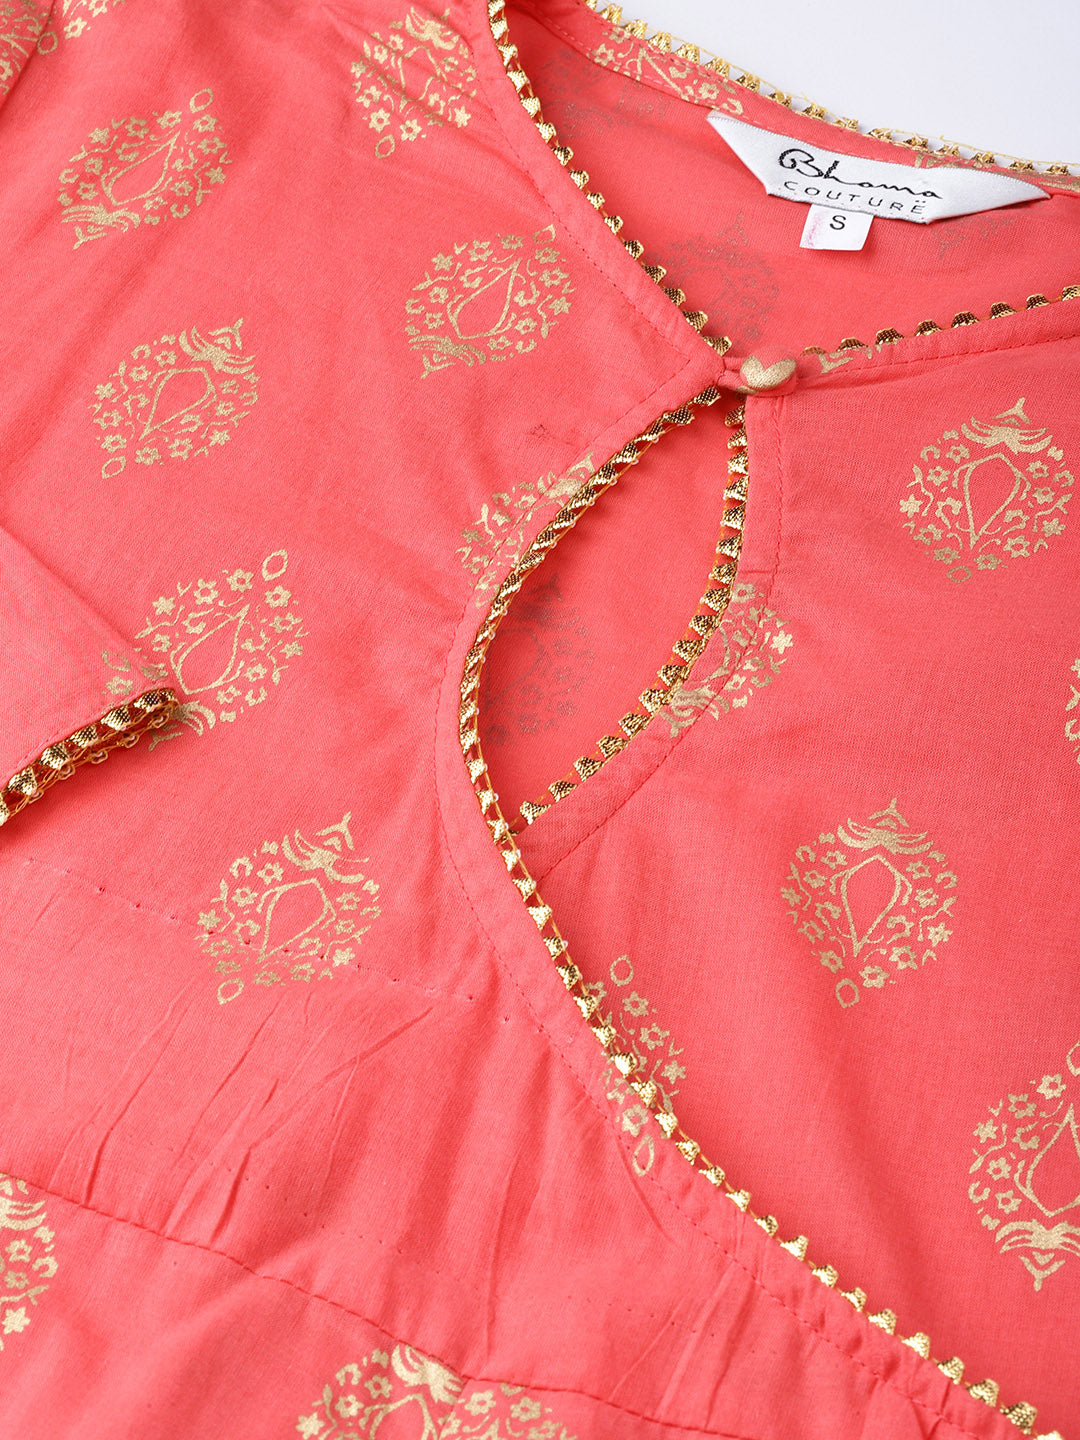 Peach And Golden Printed Kurta With Palazzos